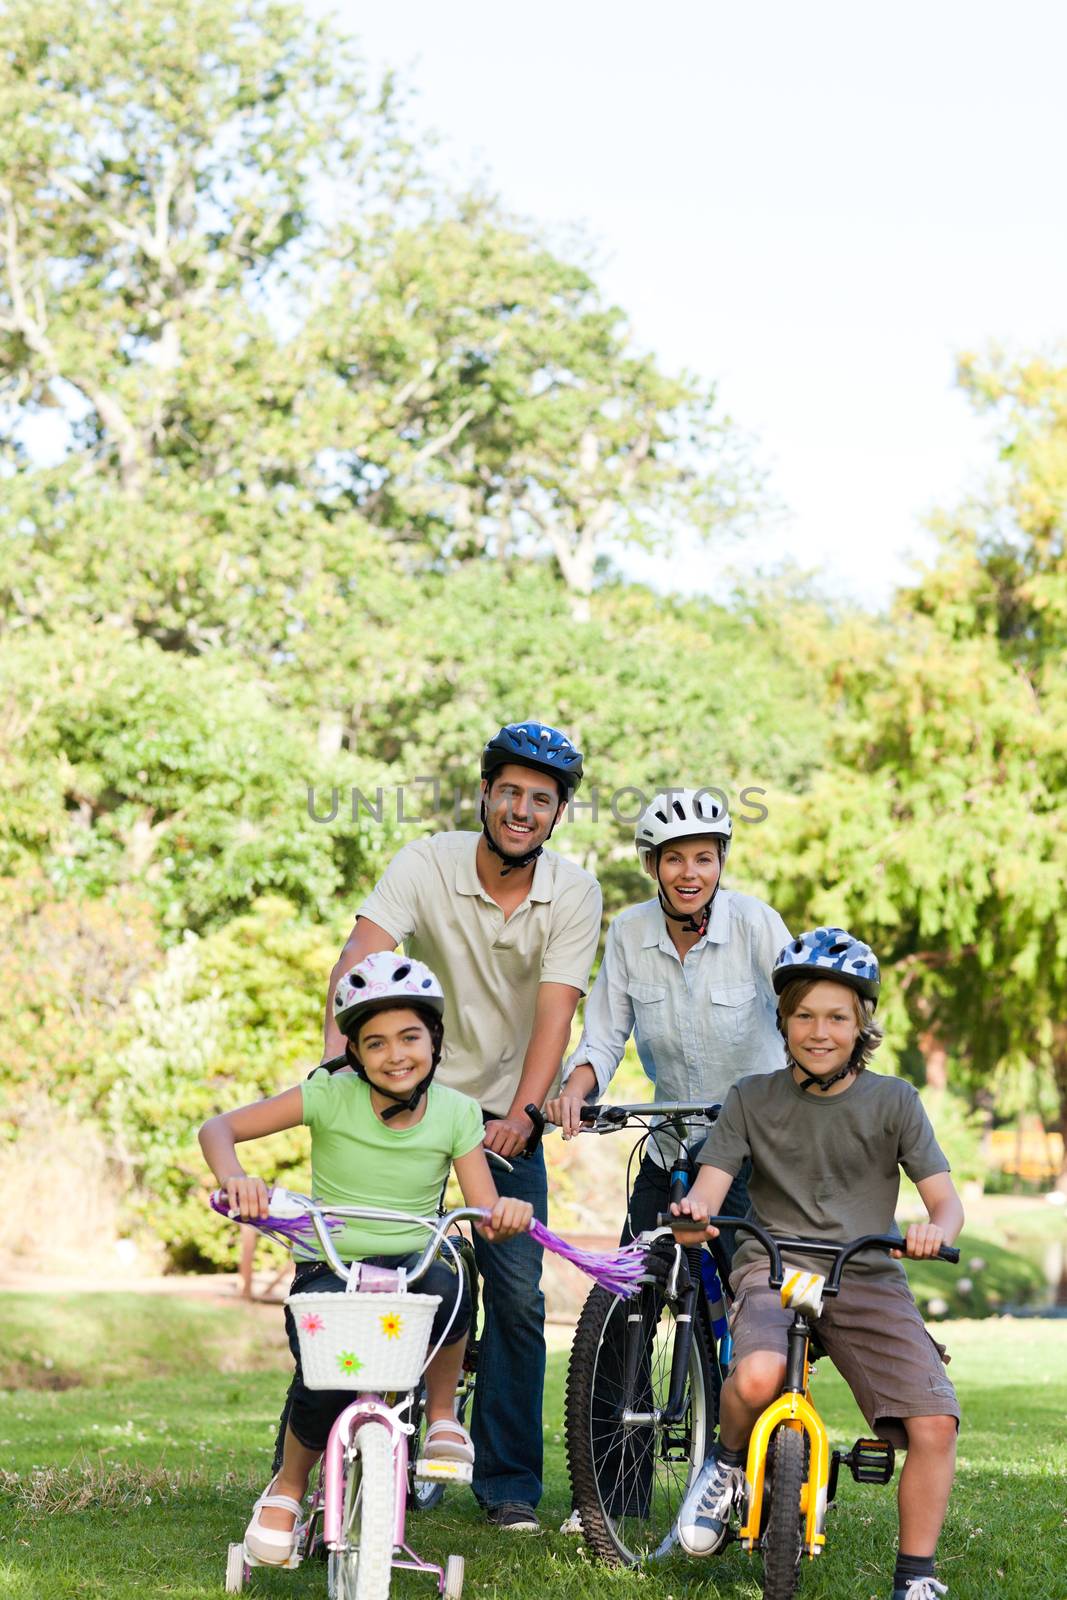 Family with their bikes during the summer by Wavebreakmedia